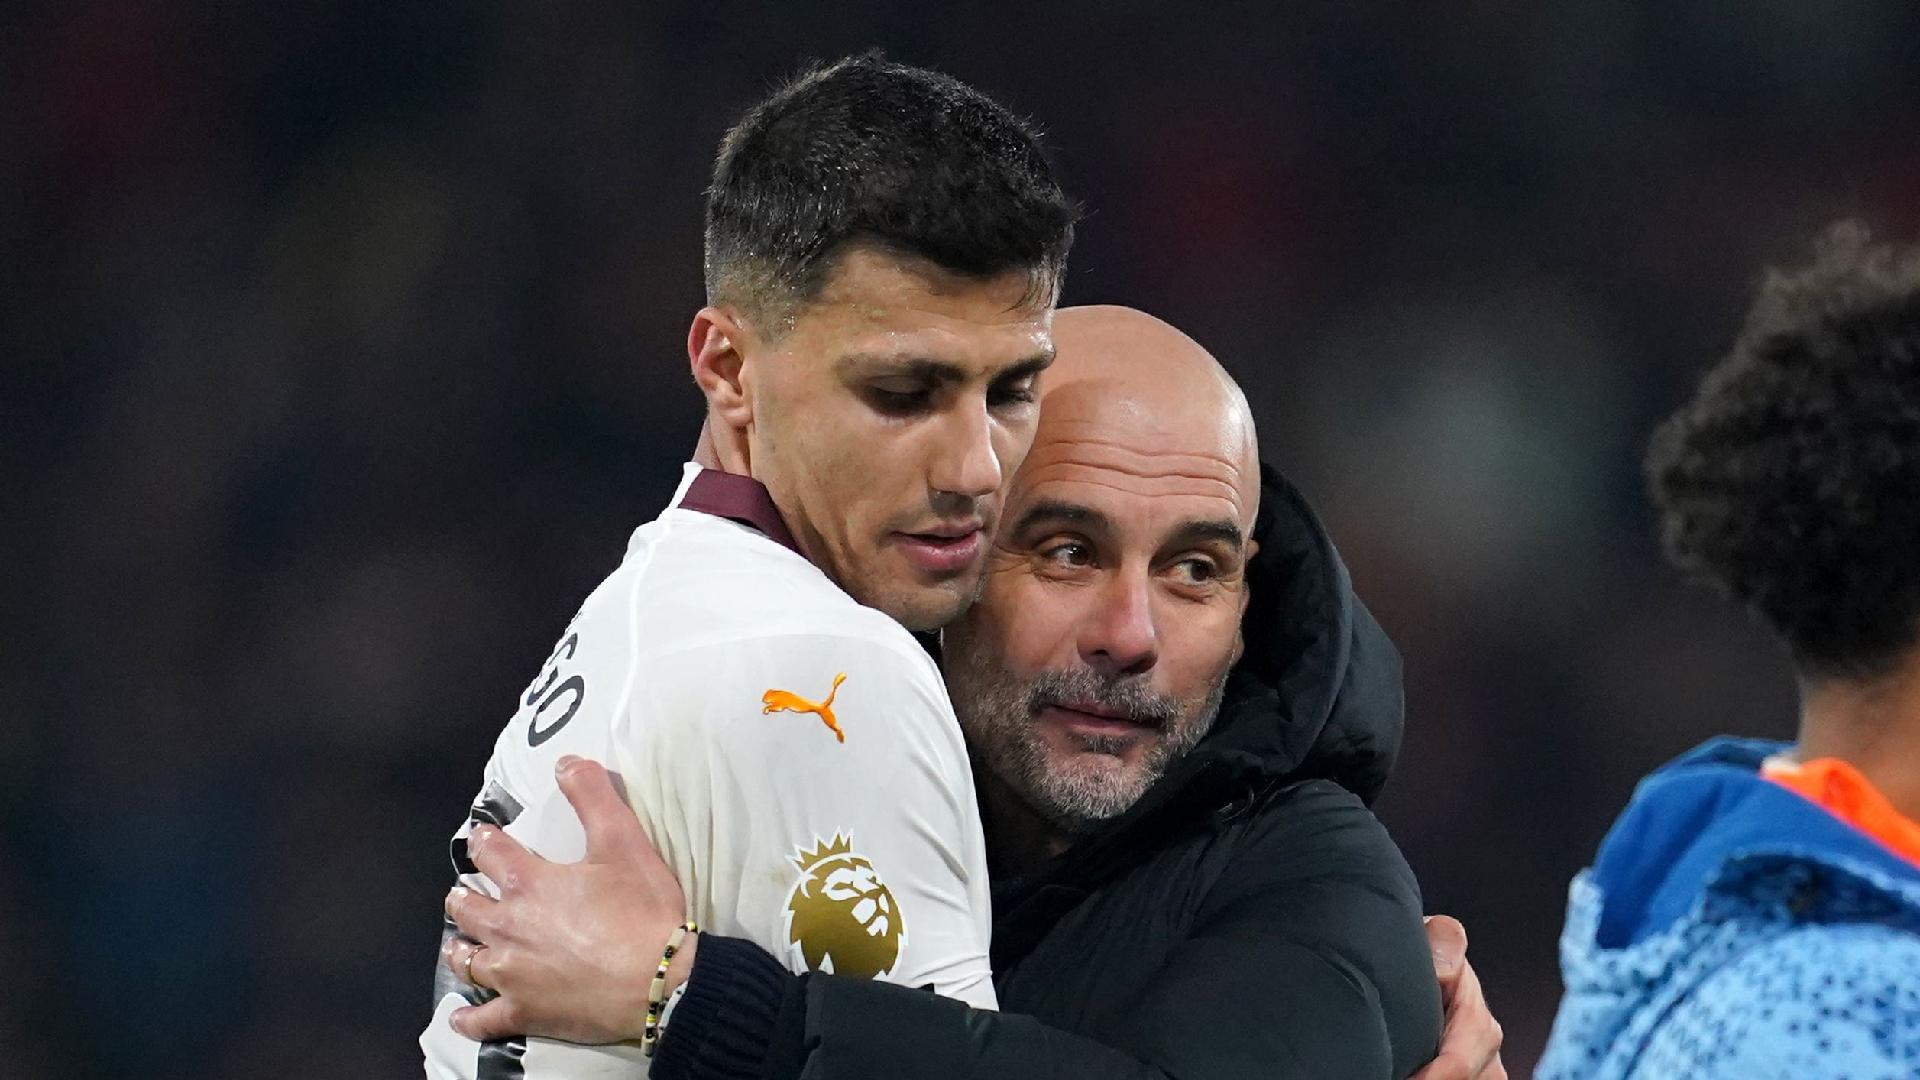 If he needs a rest he will have rest – Pep Guardiola knows Rodri must be tired